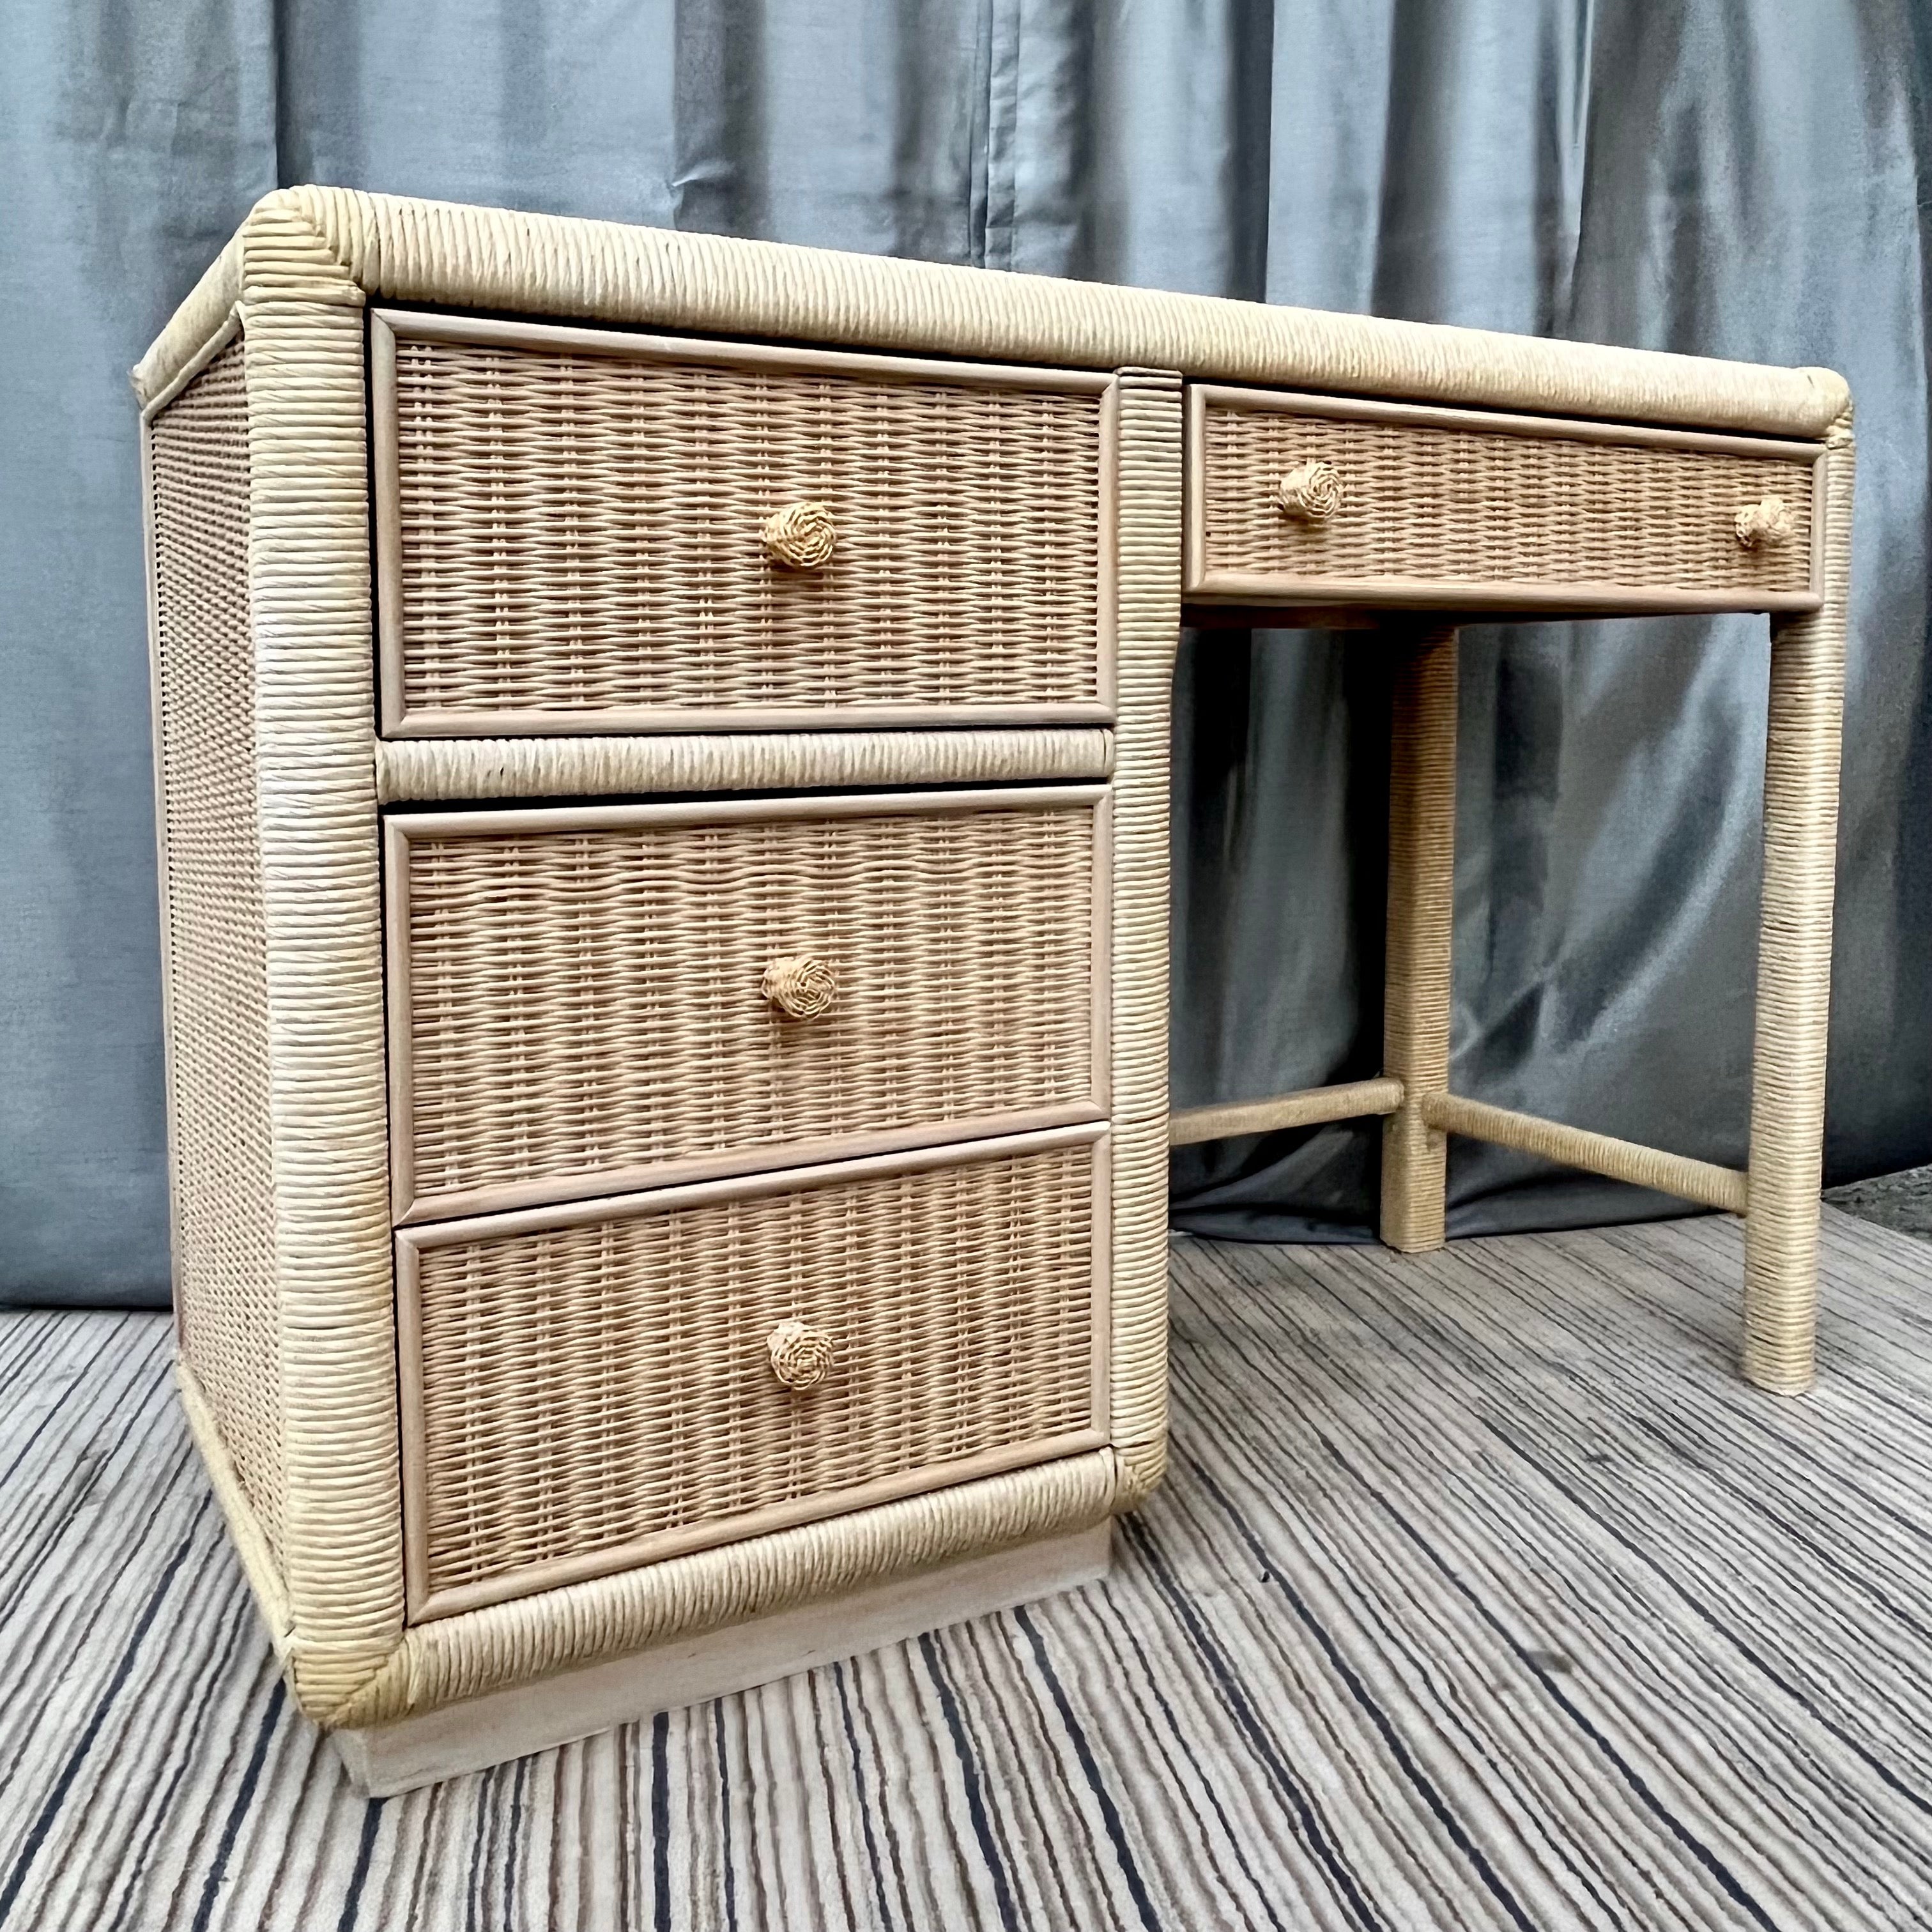 Vintage Hollywood Regency coastal style Wicker vanity / writing desk by Broyhill Furniture. Circa 1980s. 
Features four spacious drawers with rattan handles, a body wrapped in a beautifully weaved wicker with a corded wrapped trim detail around all